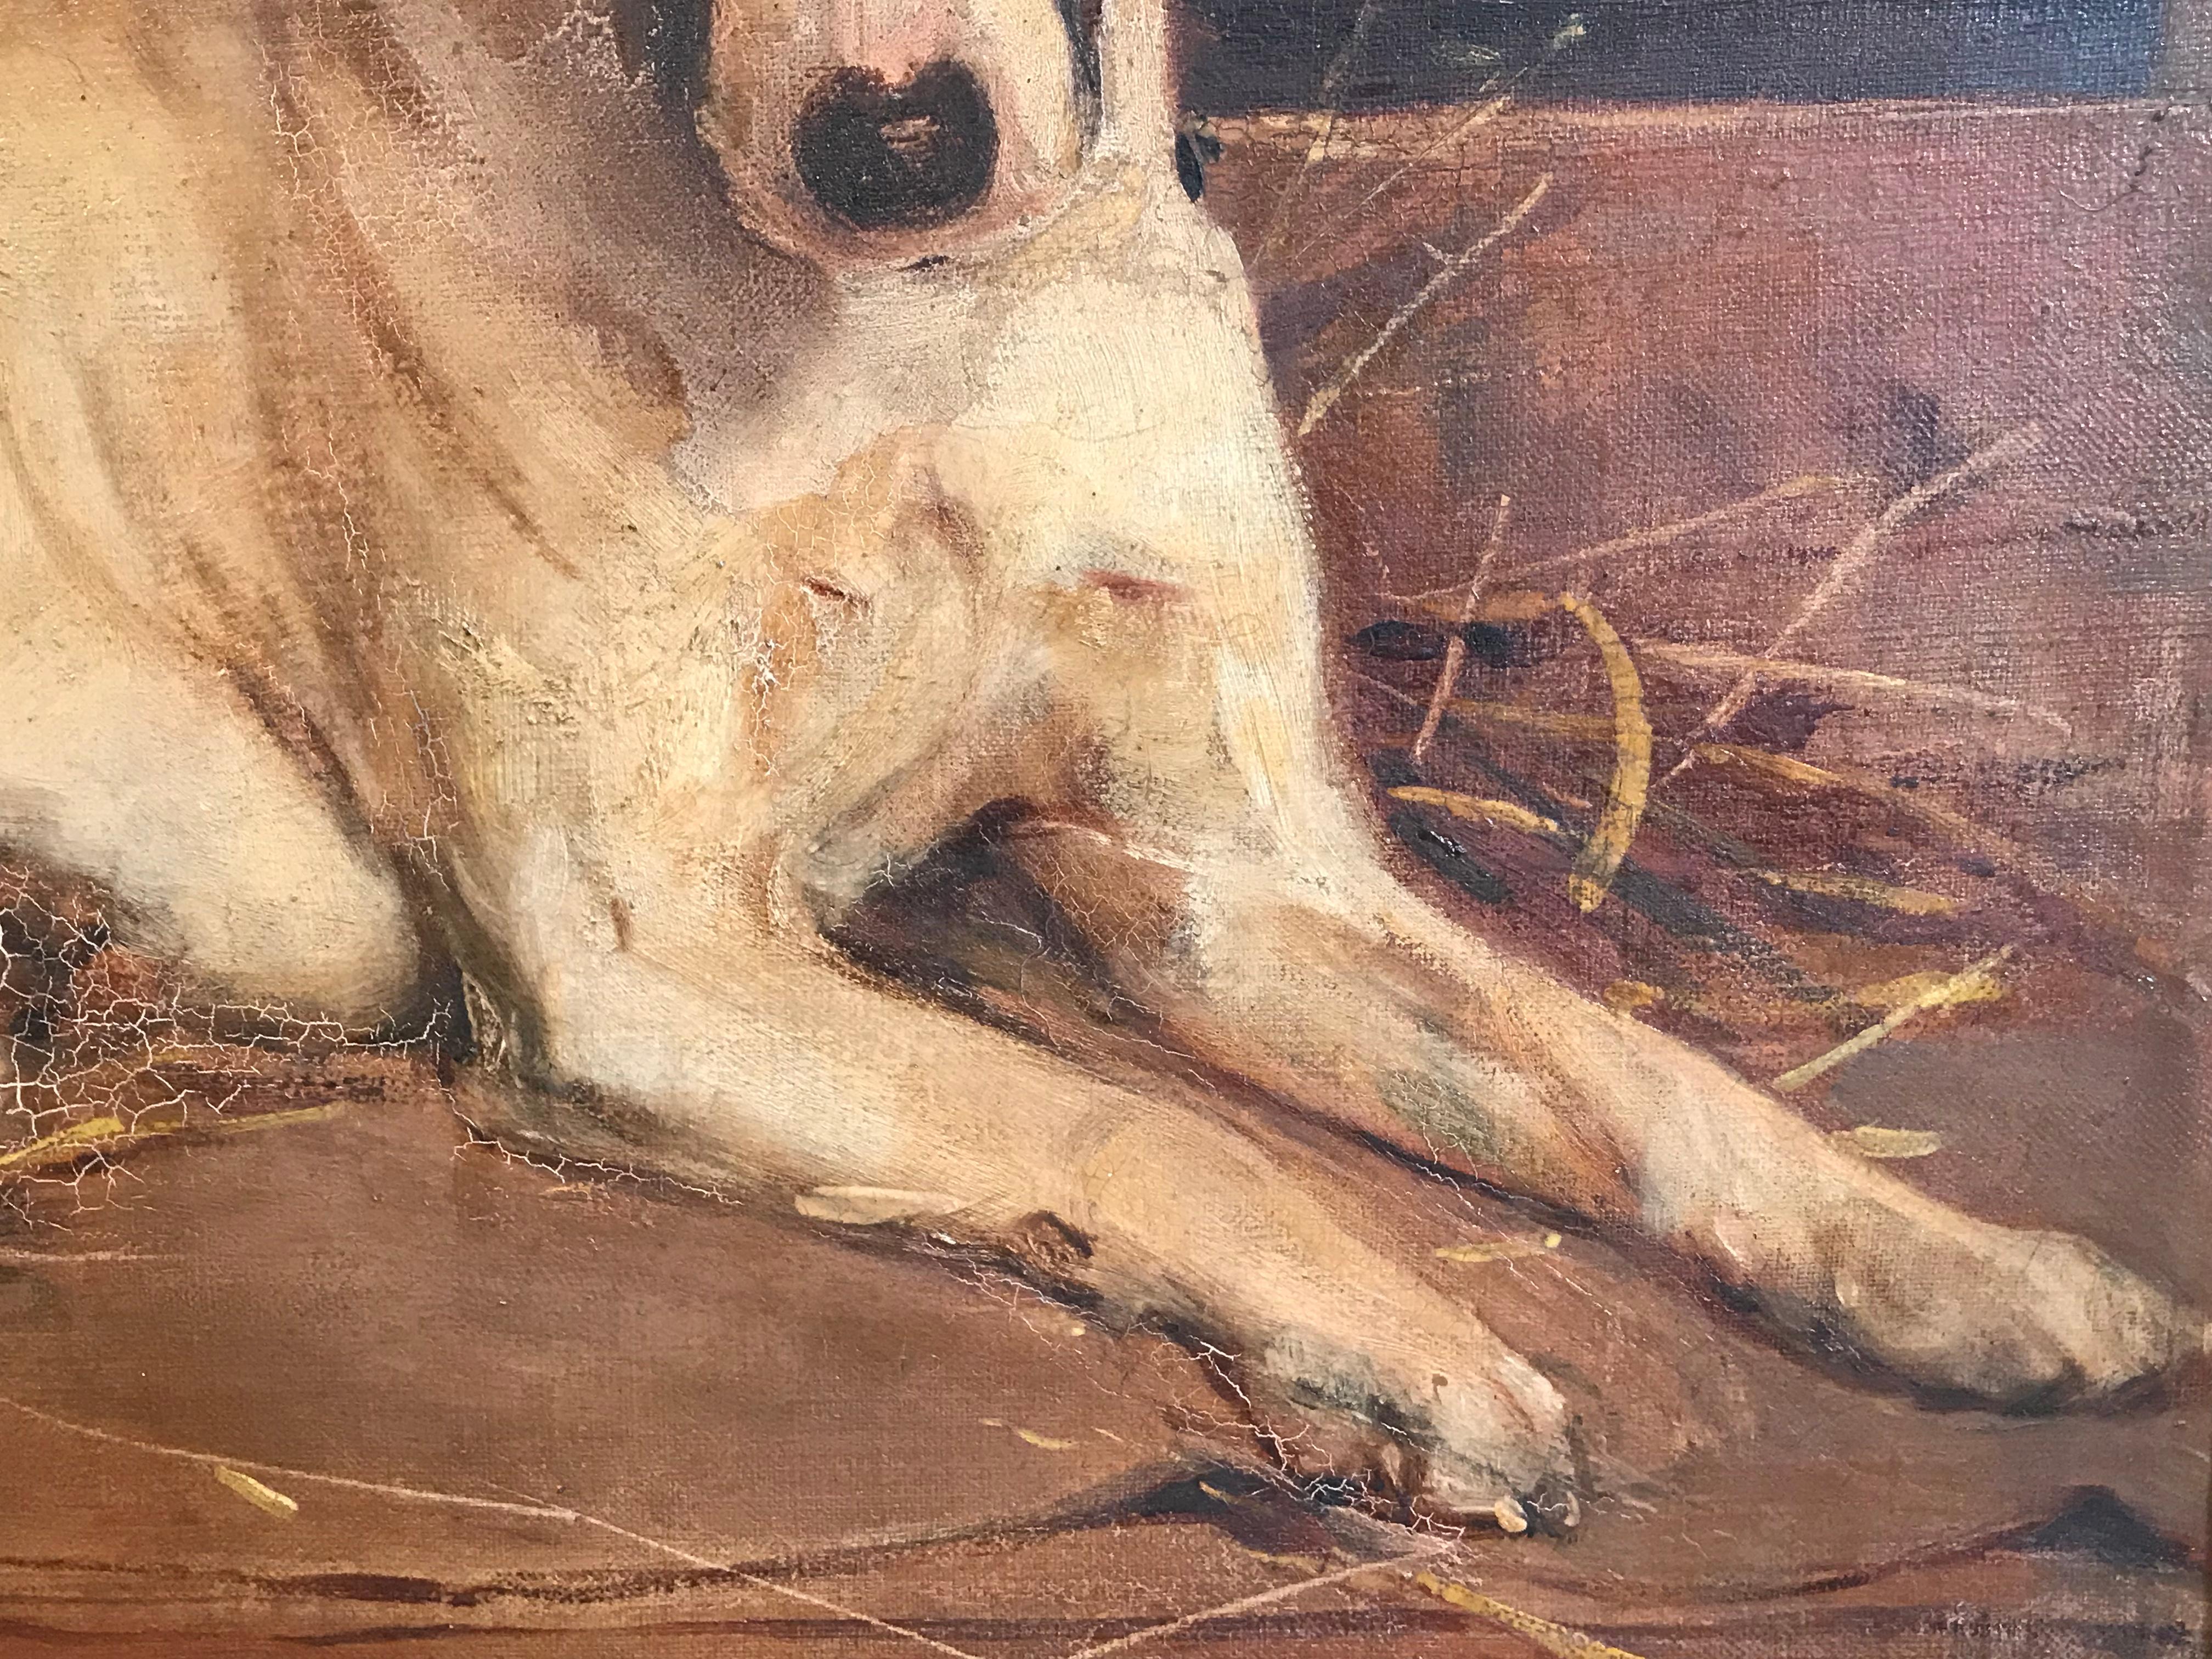 Jack Russell Terrier Dog British Oil Painting on Canvas, Antique signed original - Brown Animal Painting by Samuel Fulton